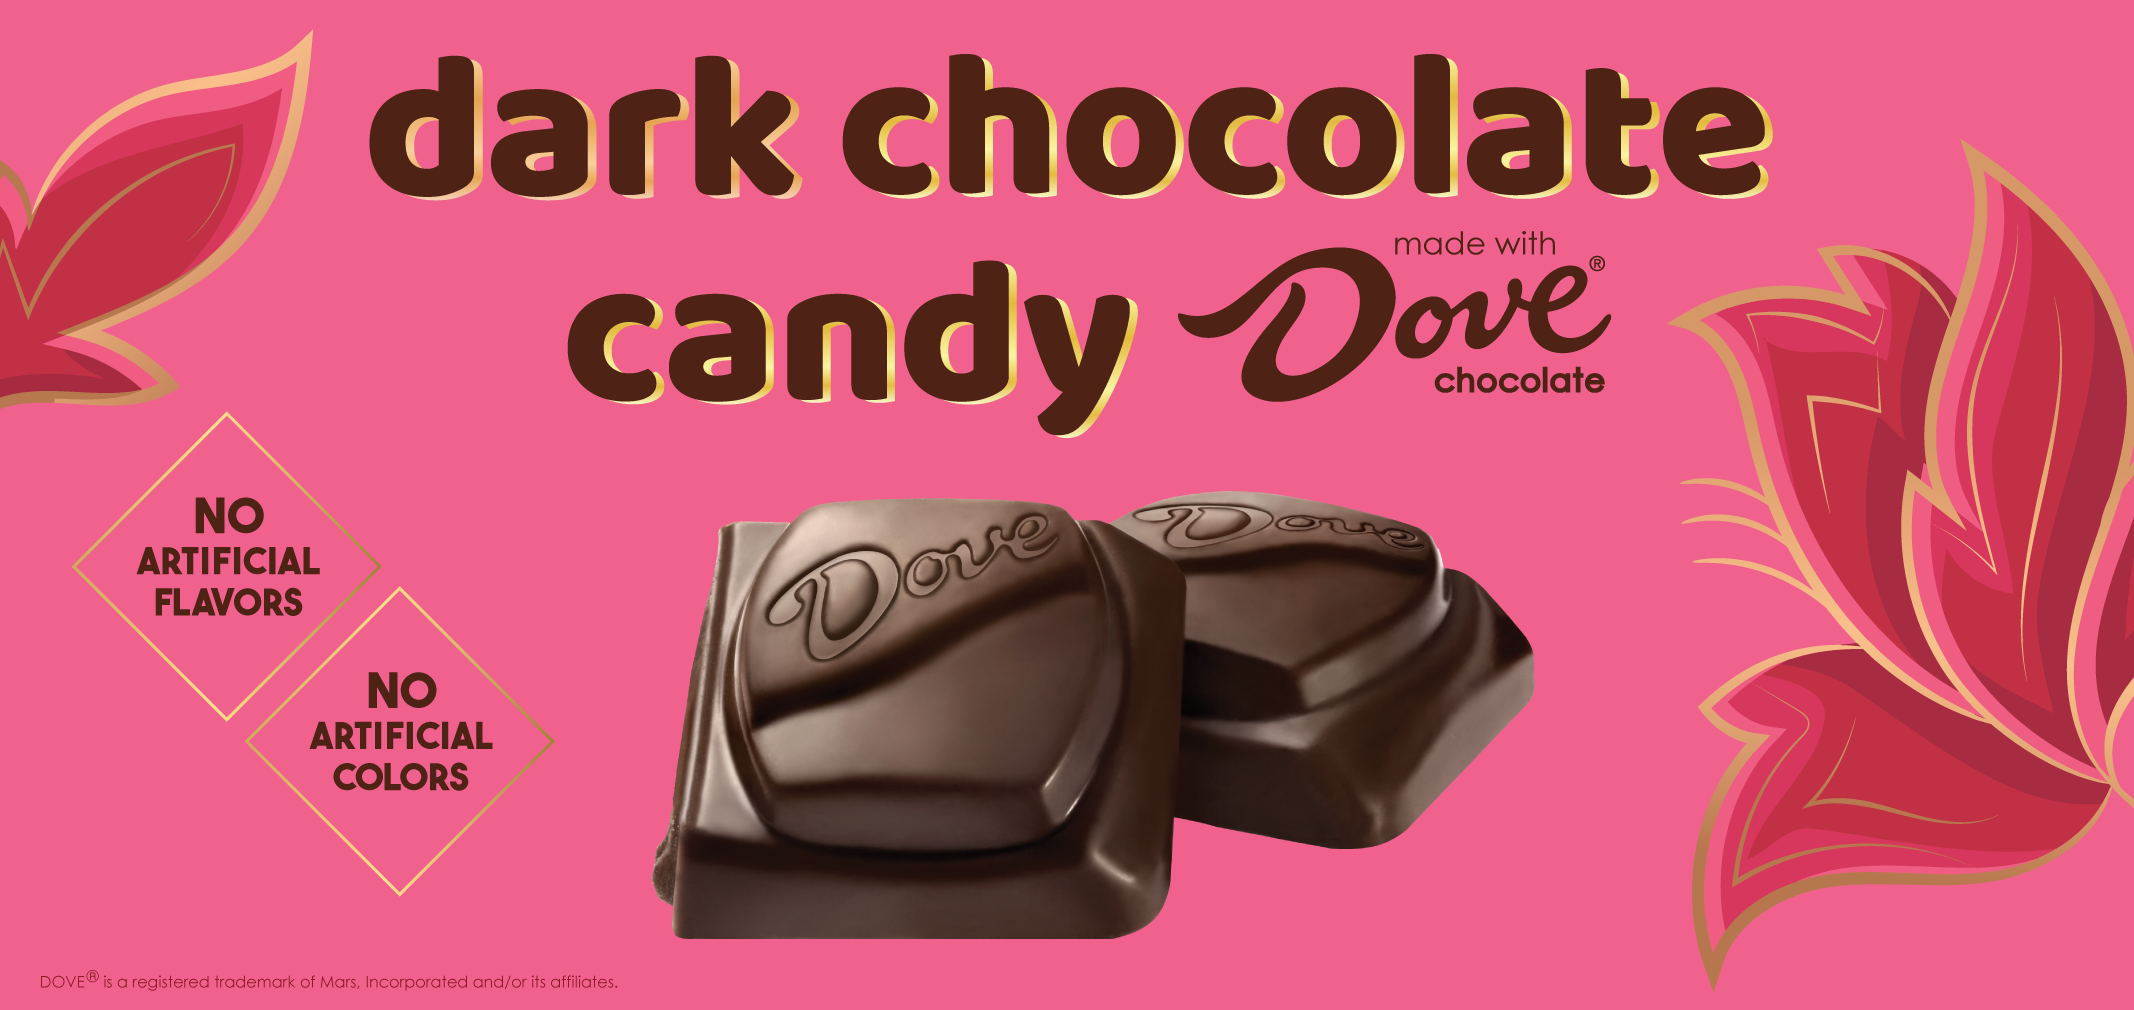 Dark Chocolate Candy made with DOVE® Chocolate  label image